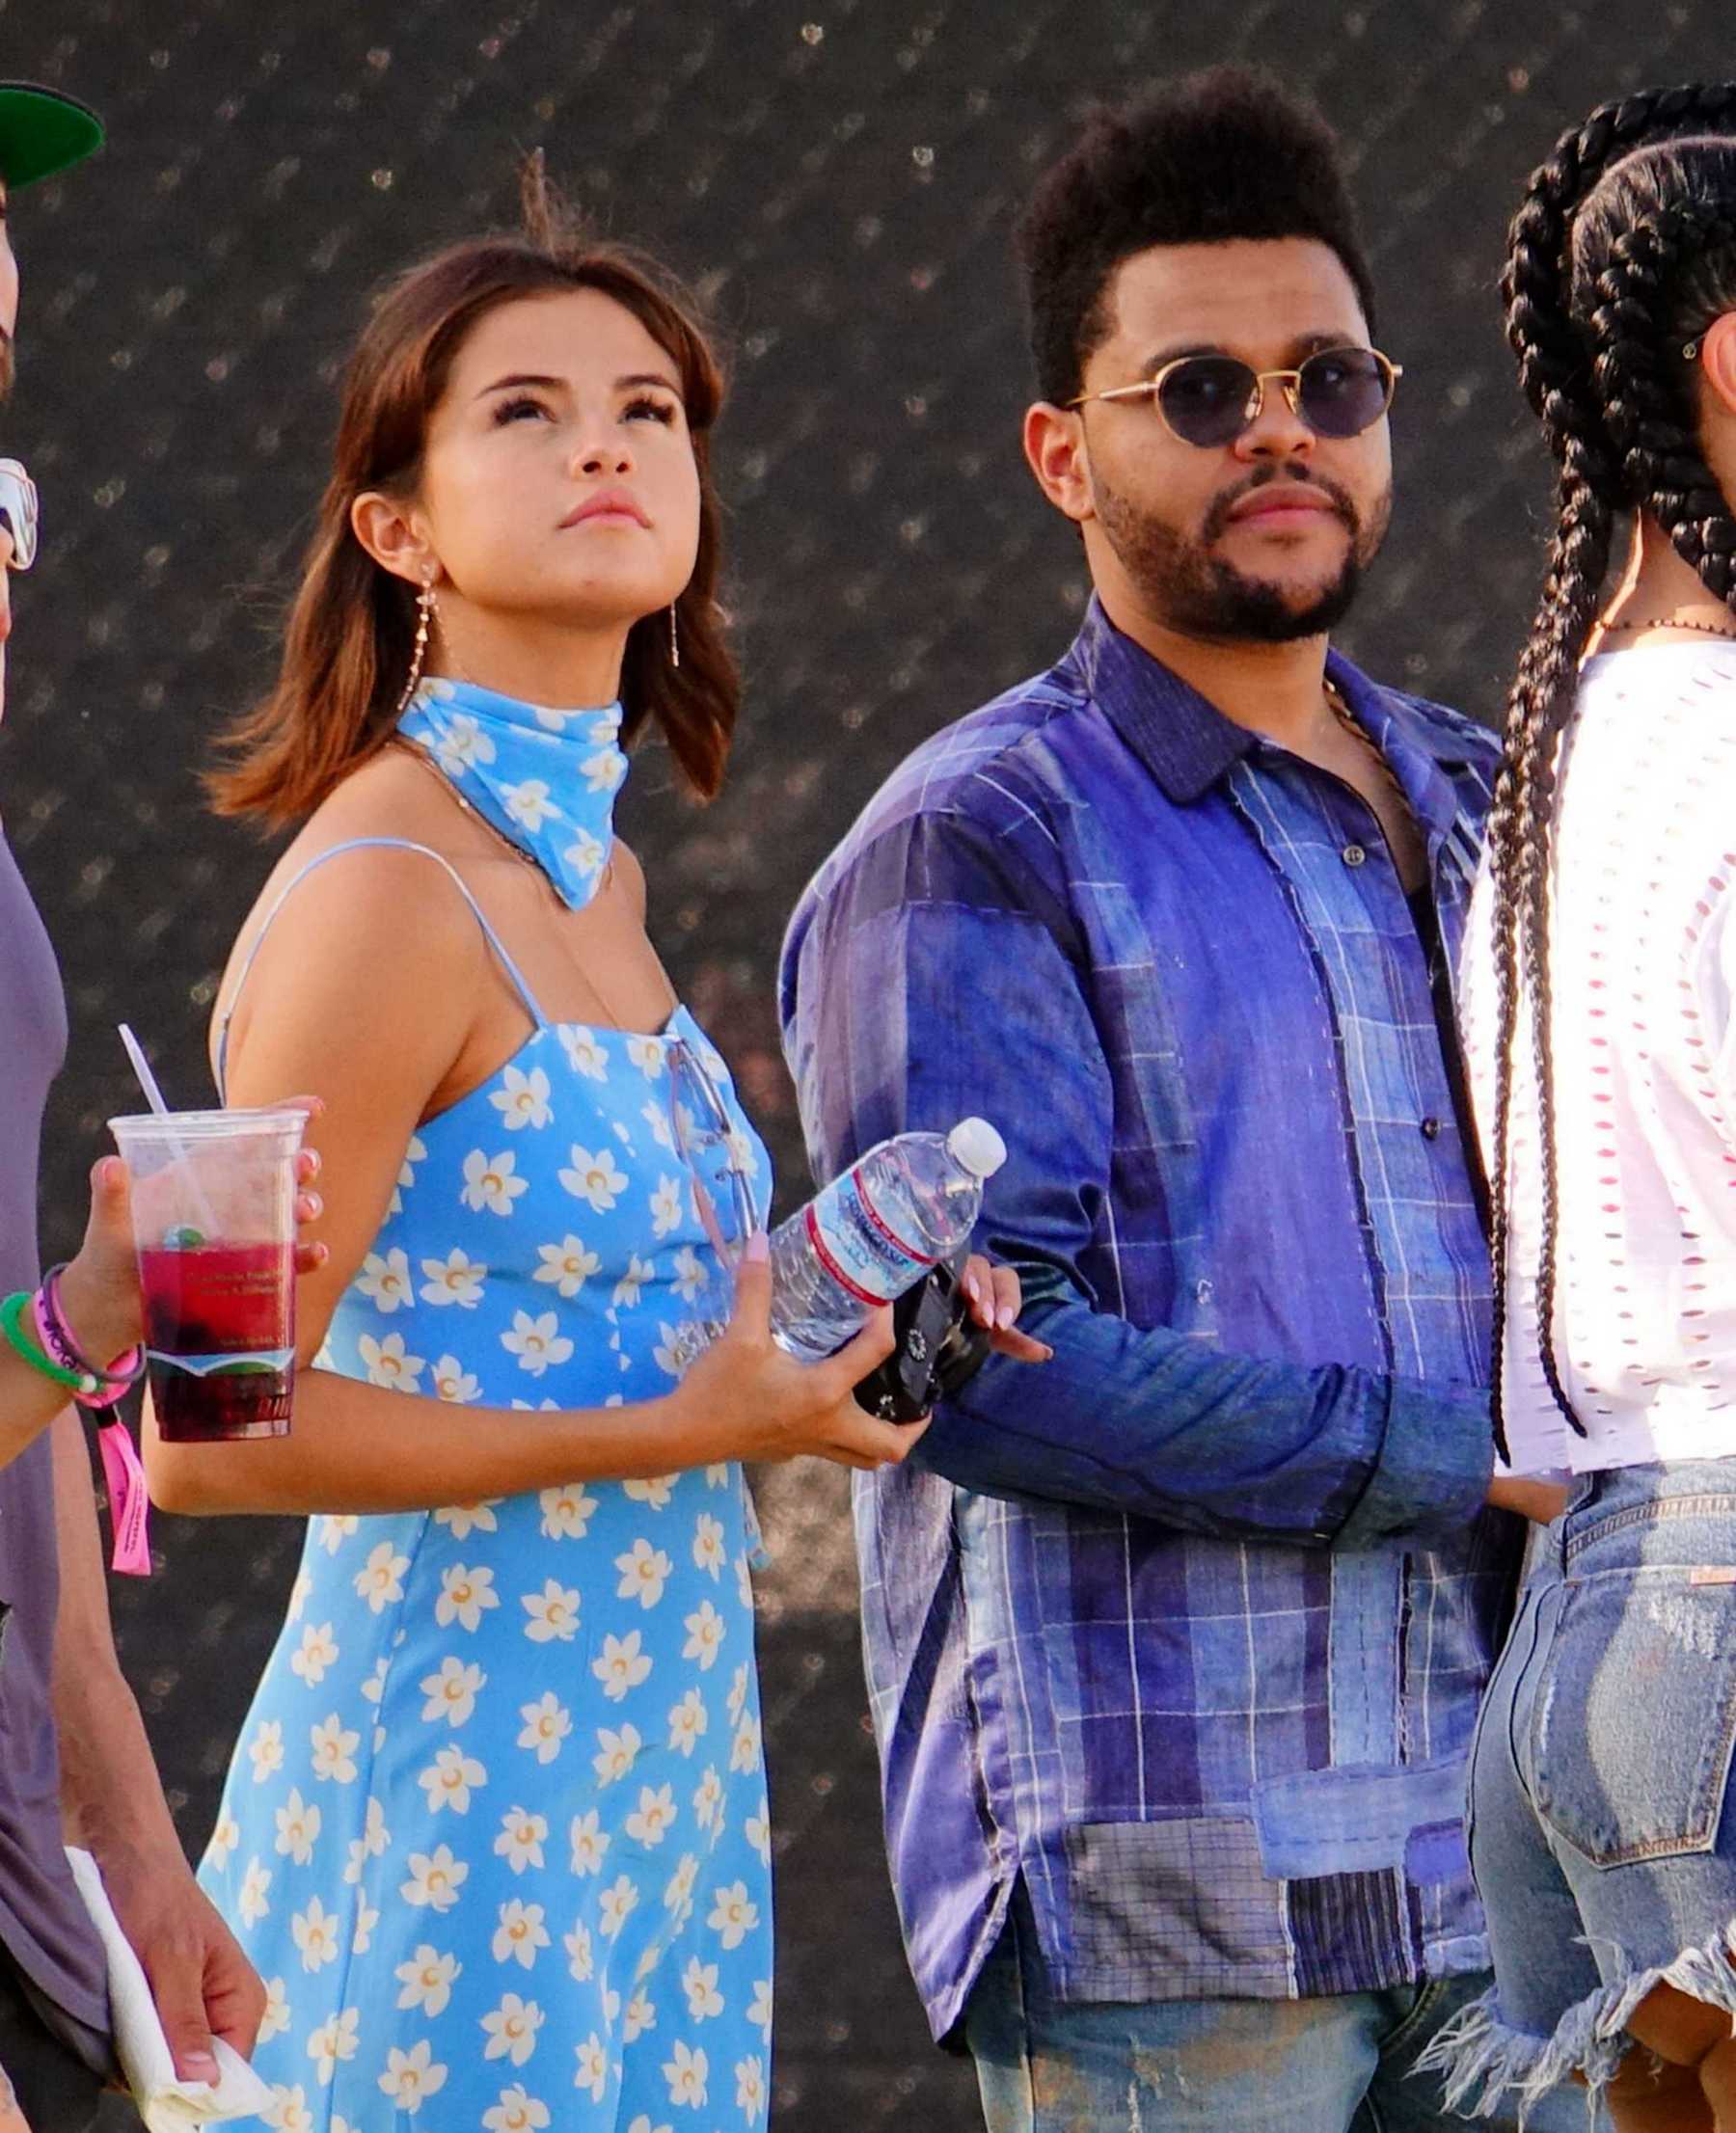 Coachella_Valley_Music_and_Arts_Festival_with_The_Weeknd_in_Indio_on_April_15-21.jpg